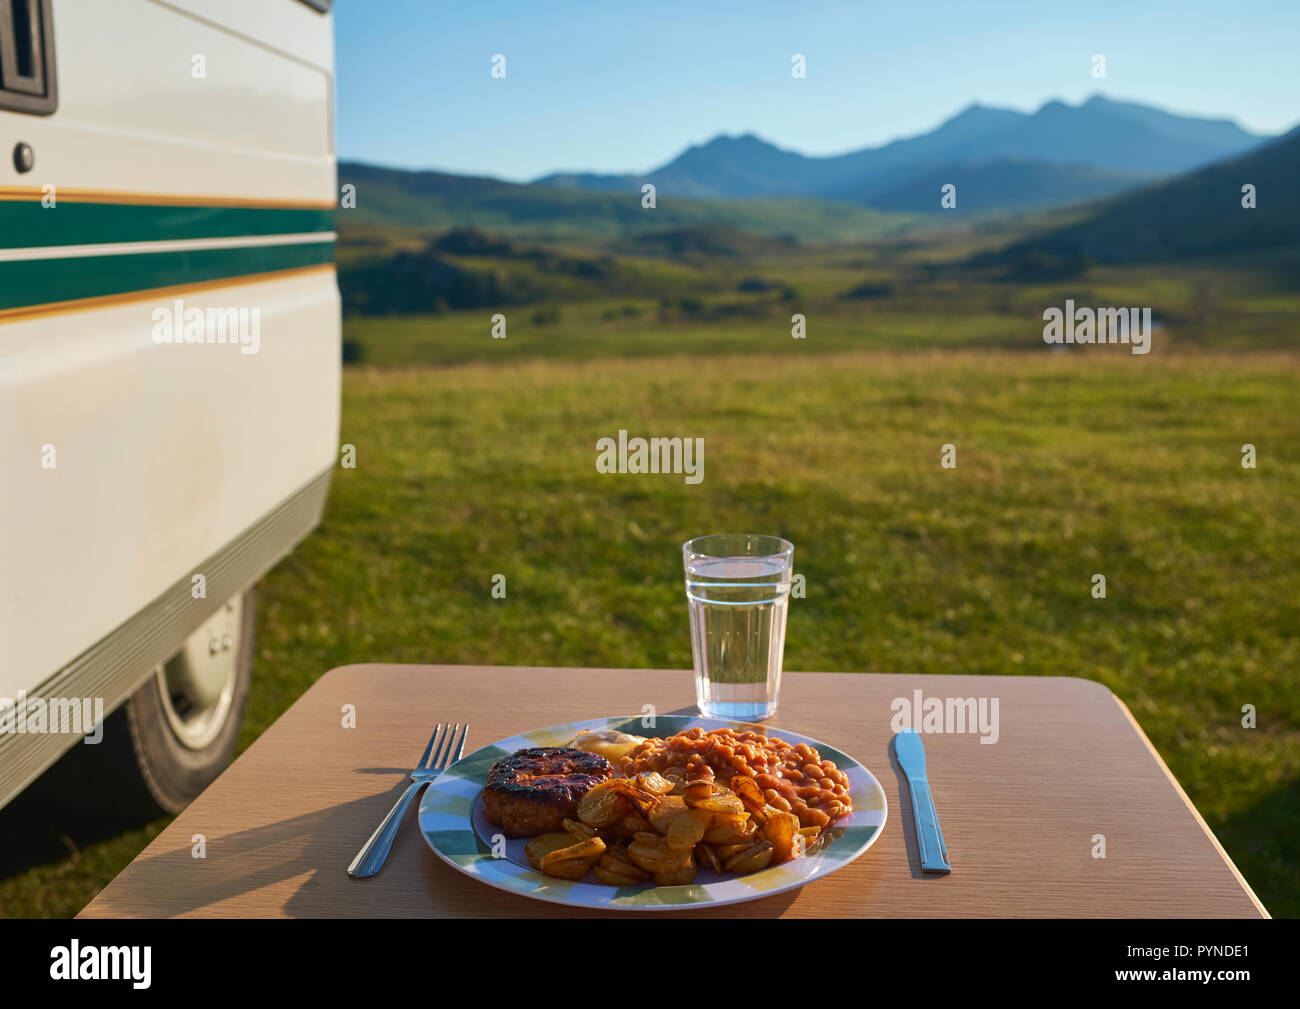 A plate of food on a table with a knife, fork and a glass of water outside next to a camper van with snowdon in the back ground, Wales, UK Stock Photo